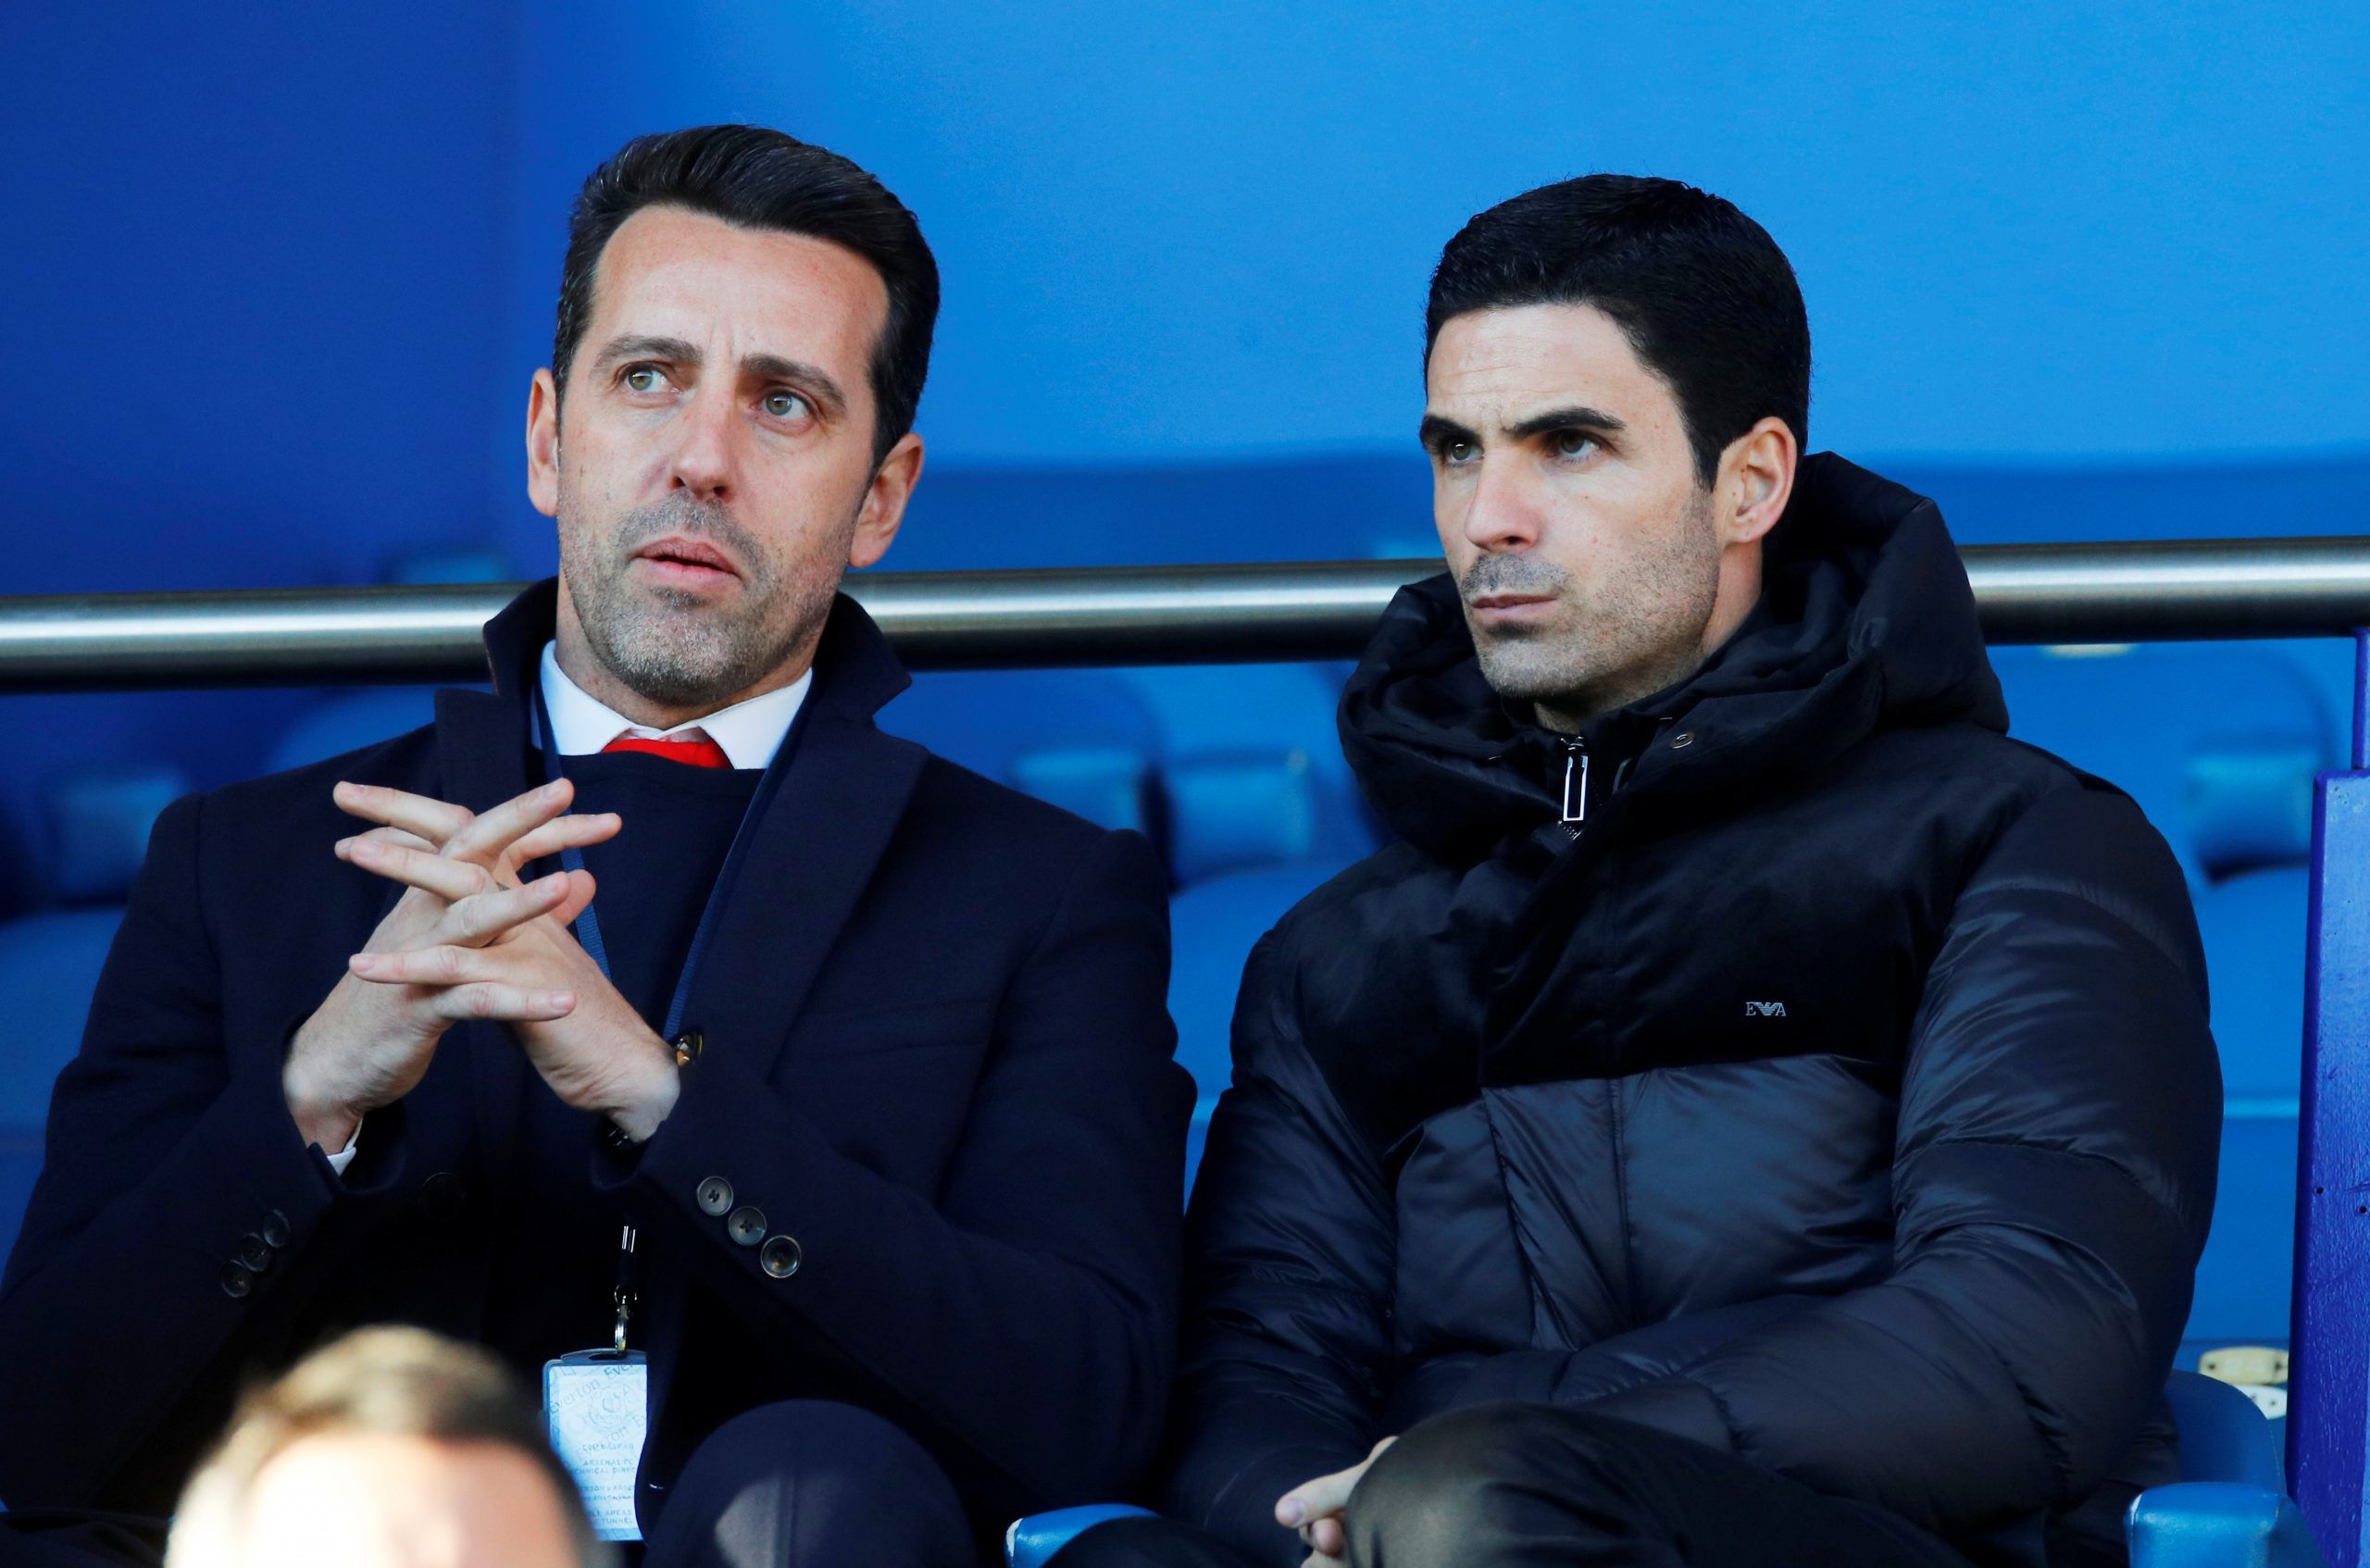 Soccer Football - Premier League - Everton v Arsenal - Goodison Park, Liverpool, Britain - December 21, 2019  New Arsenal manager Mikel Arteta and technical director Edu inside the stadium before the match   REUTERS/Phil Noble  EDITORIAL USE ONLY. No use with unauthorized audio, video, data, fixture lists, club/league logos or 